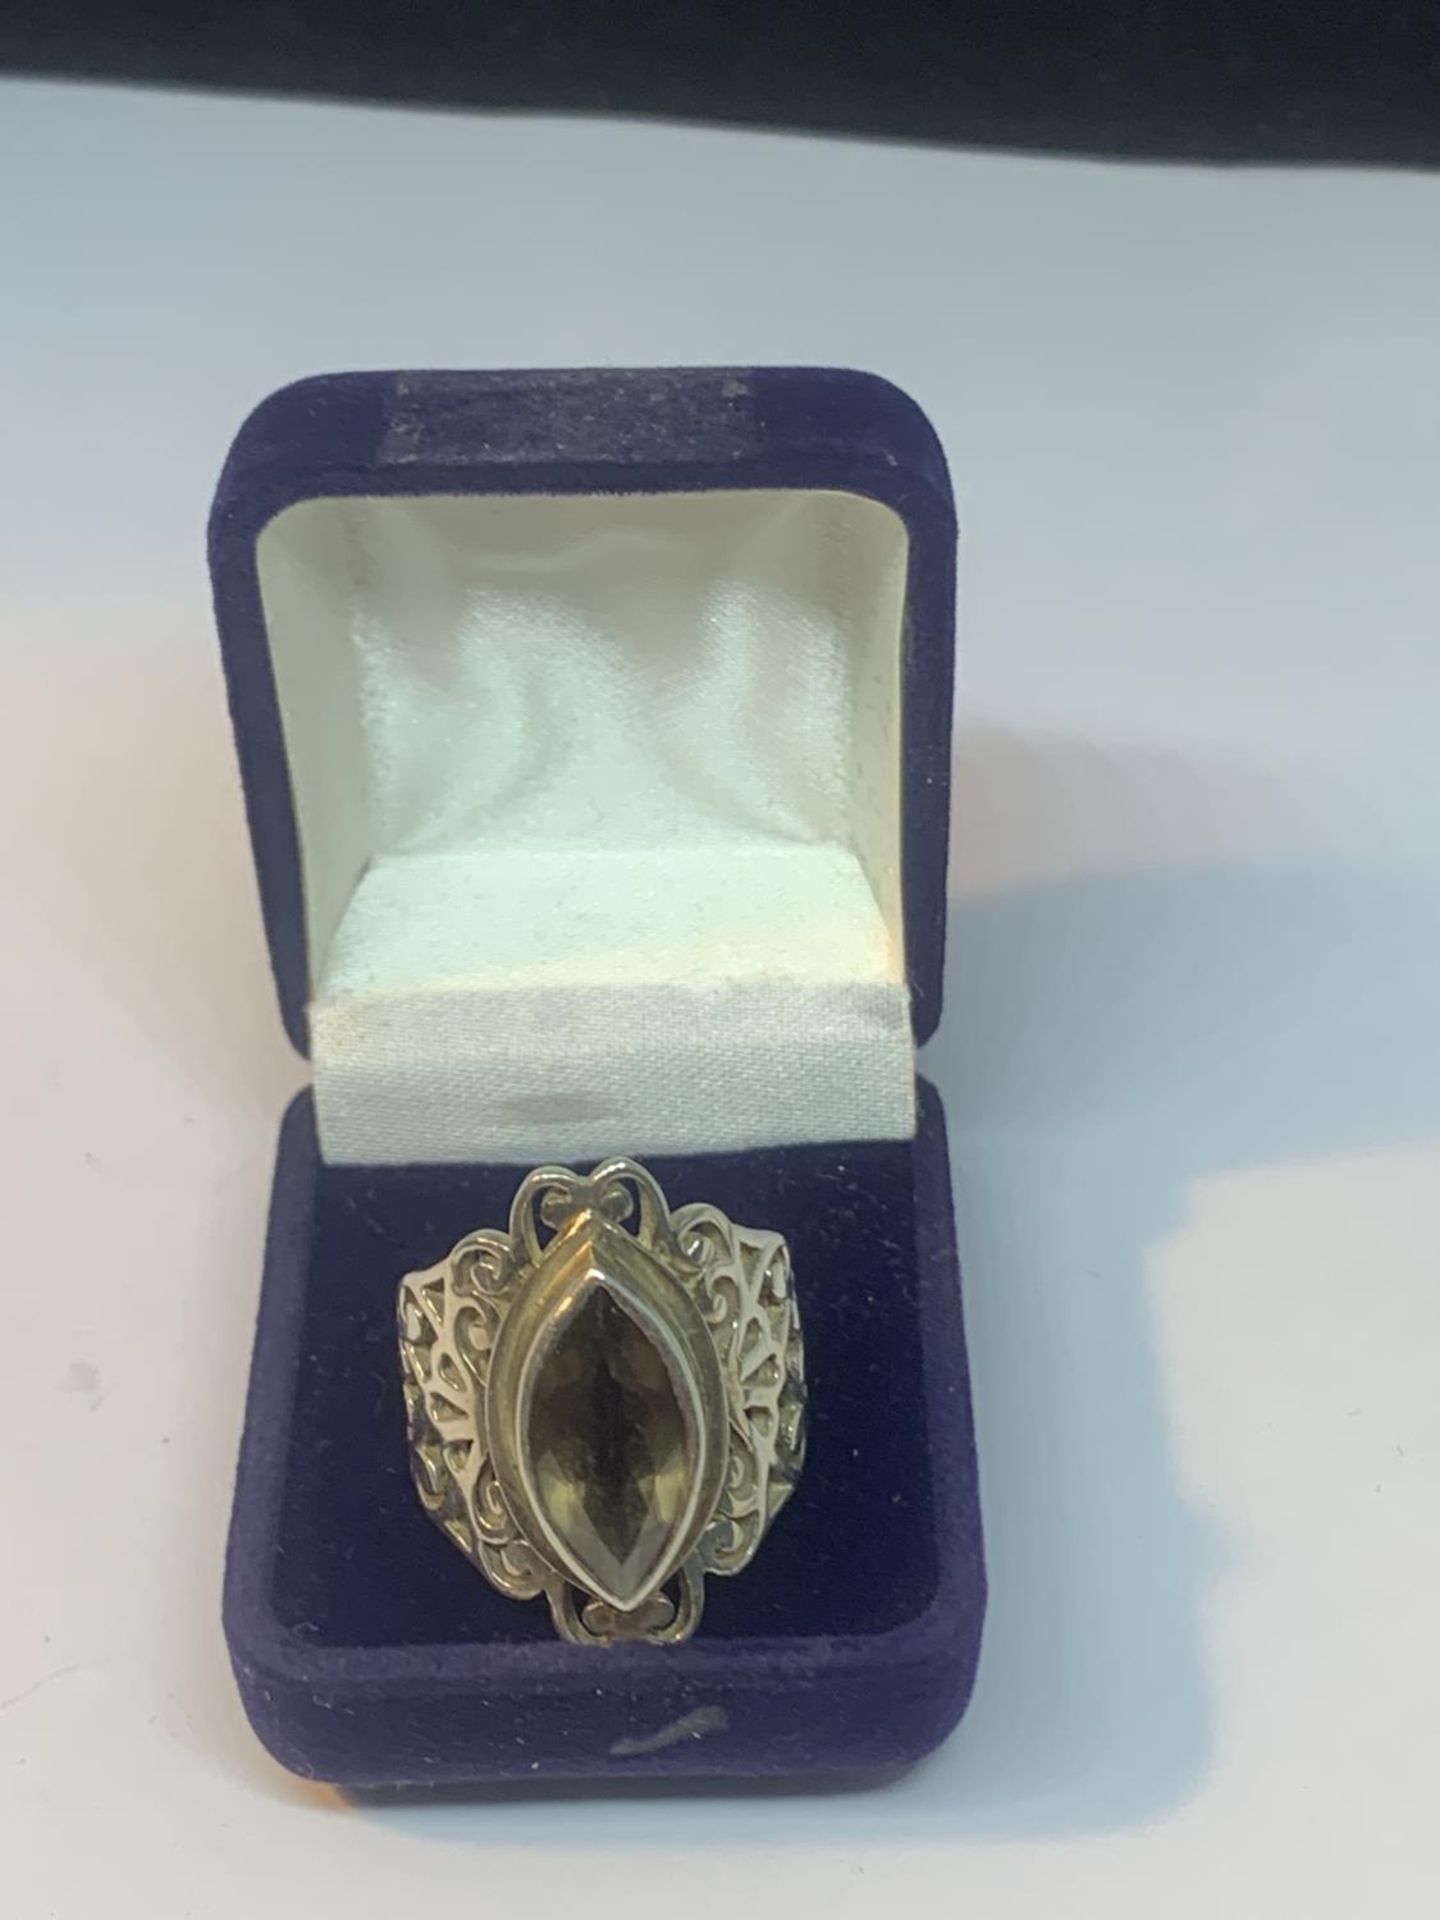 A SILVER DRESS RING WITH A SMOKEY STONE IN A PRESENTATION BOX